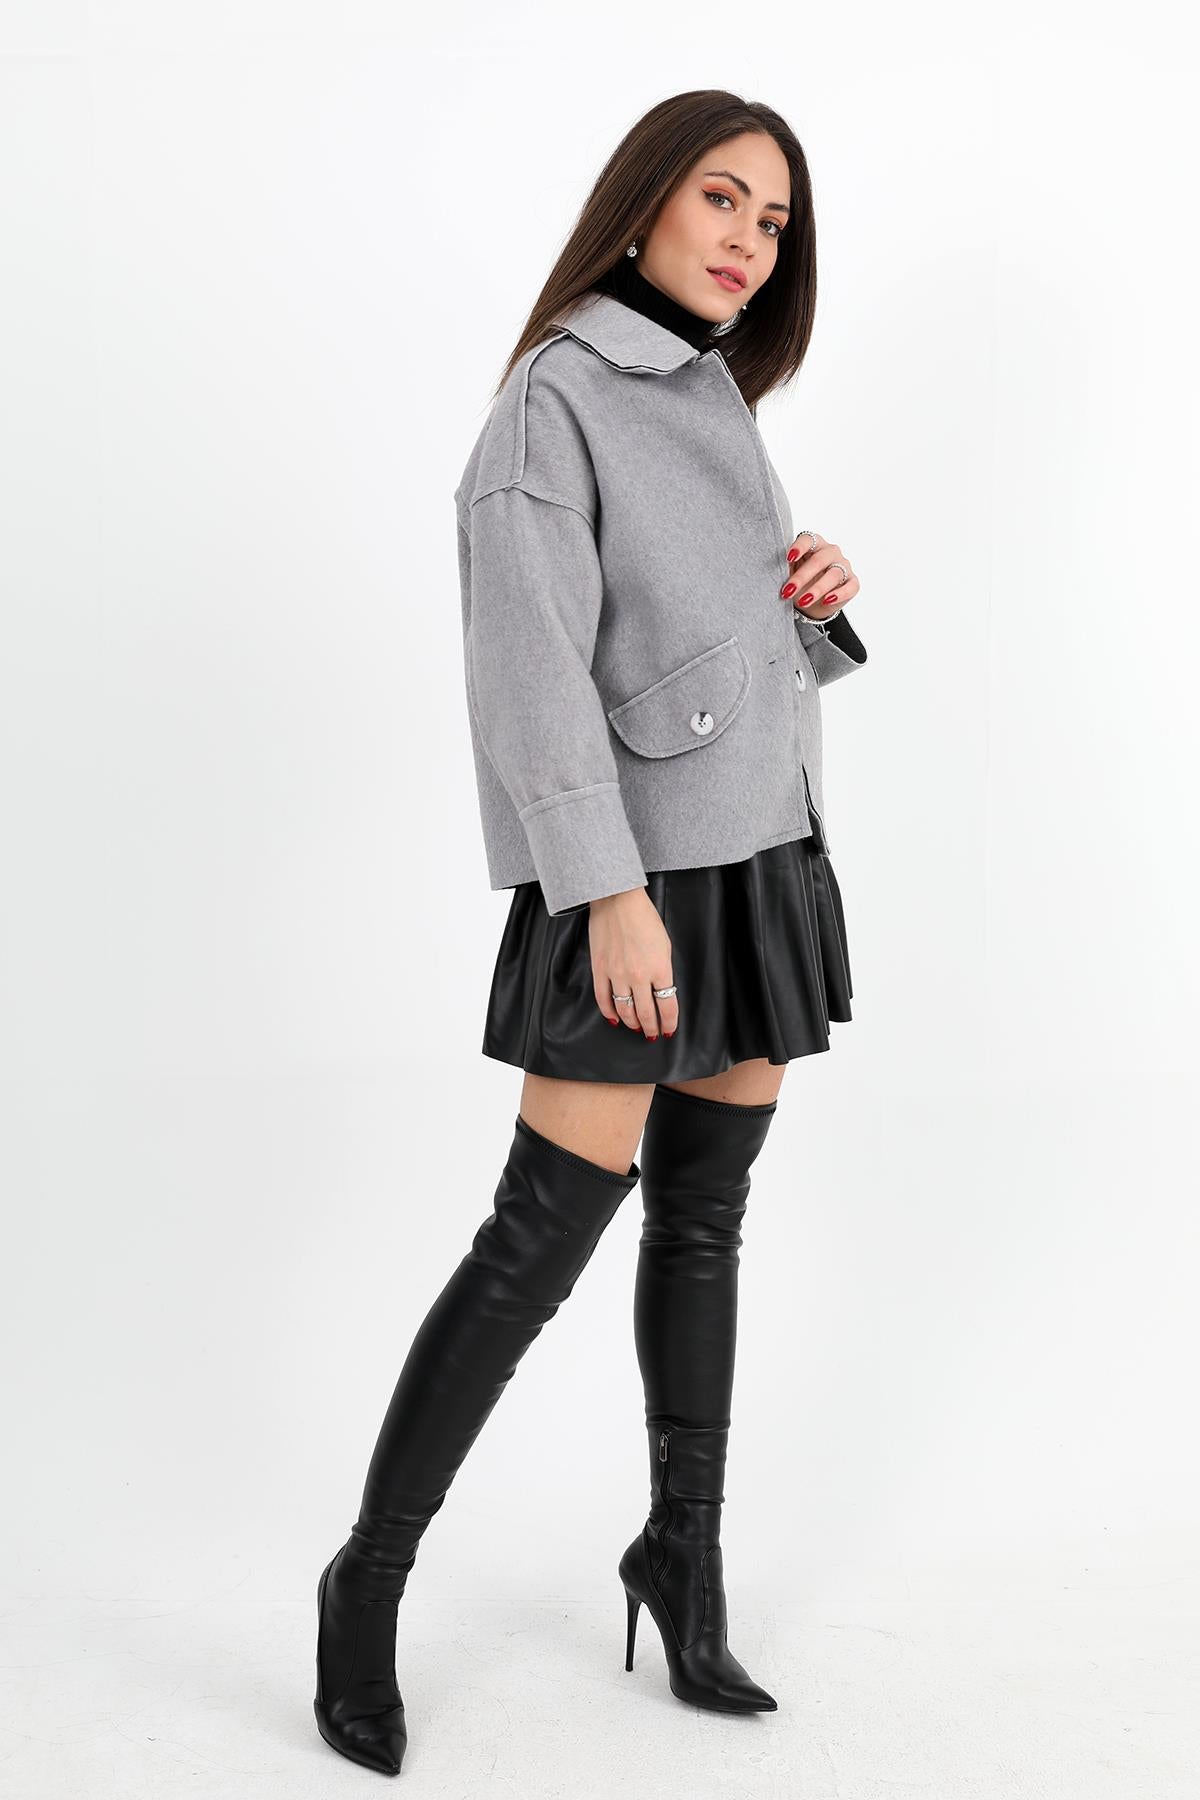 Women's Coat with Pocket Flap Button-Up Short - Gray - STREETMODE ™